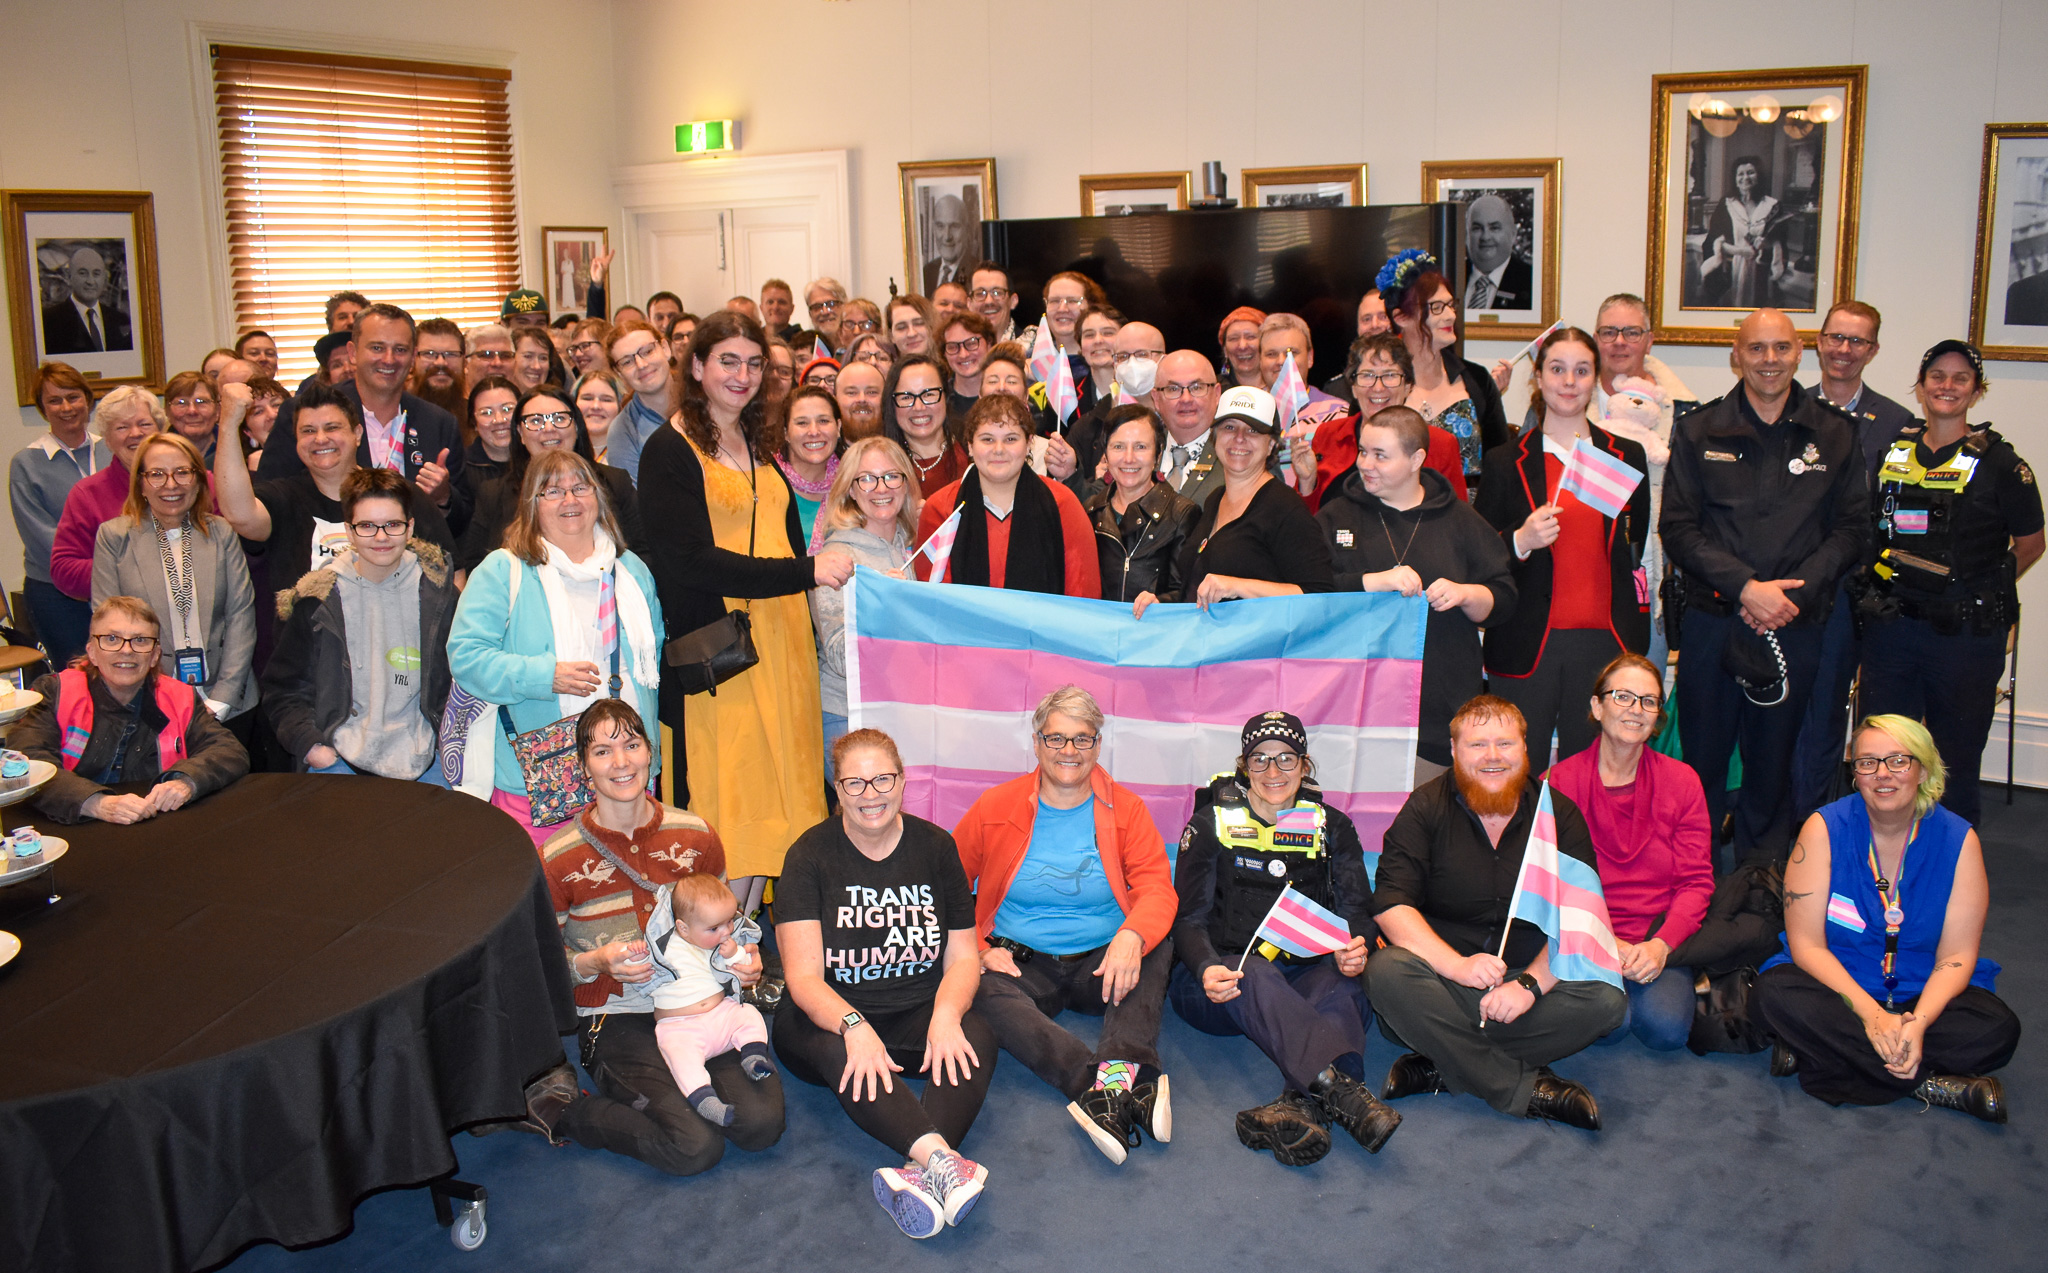 Mayor Des Hudson and community members and political representatives on Transgender Day of Visibility